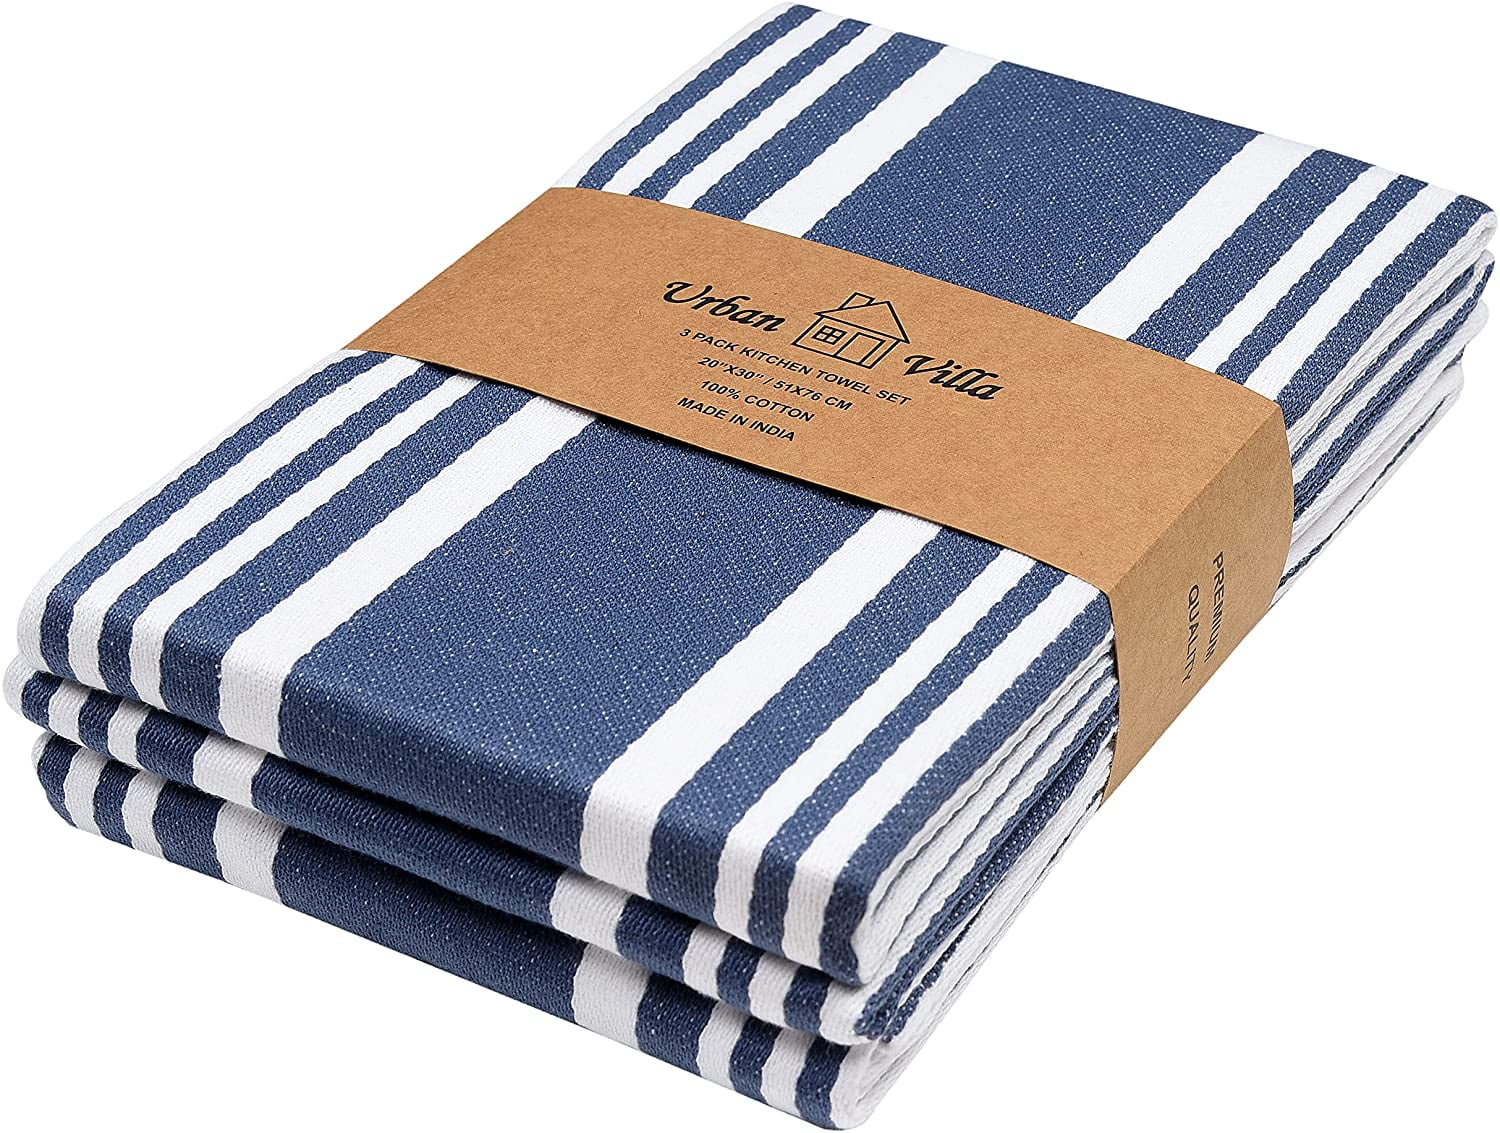 Set of 6 Highly Absorbent Bar Towels & Tea Towels - Size: 20X30 Inch Premium Quality,100% Cotton Dish Towels,Mitered Corners, Urban Villa Kitchen Towels,Floral Print Multi Color 